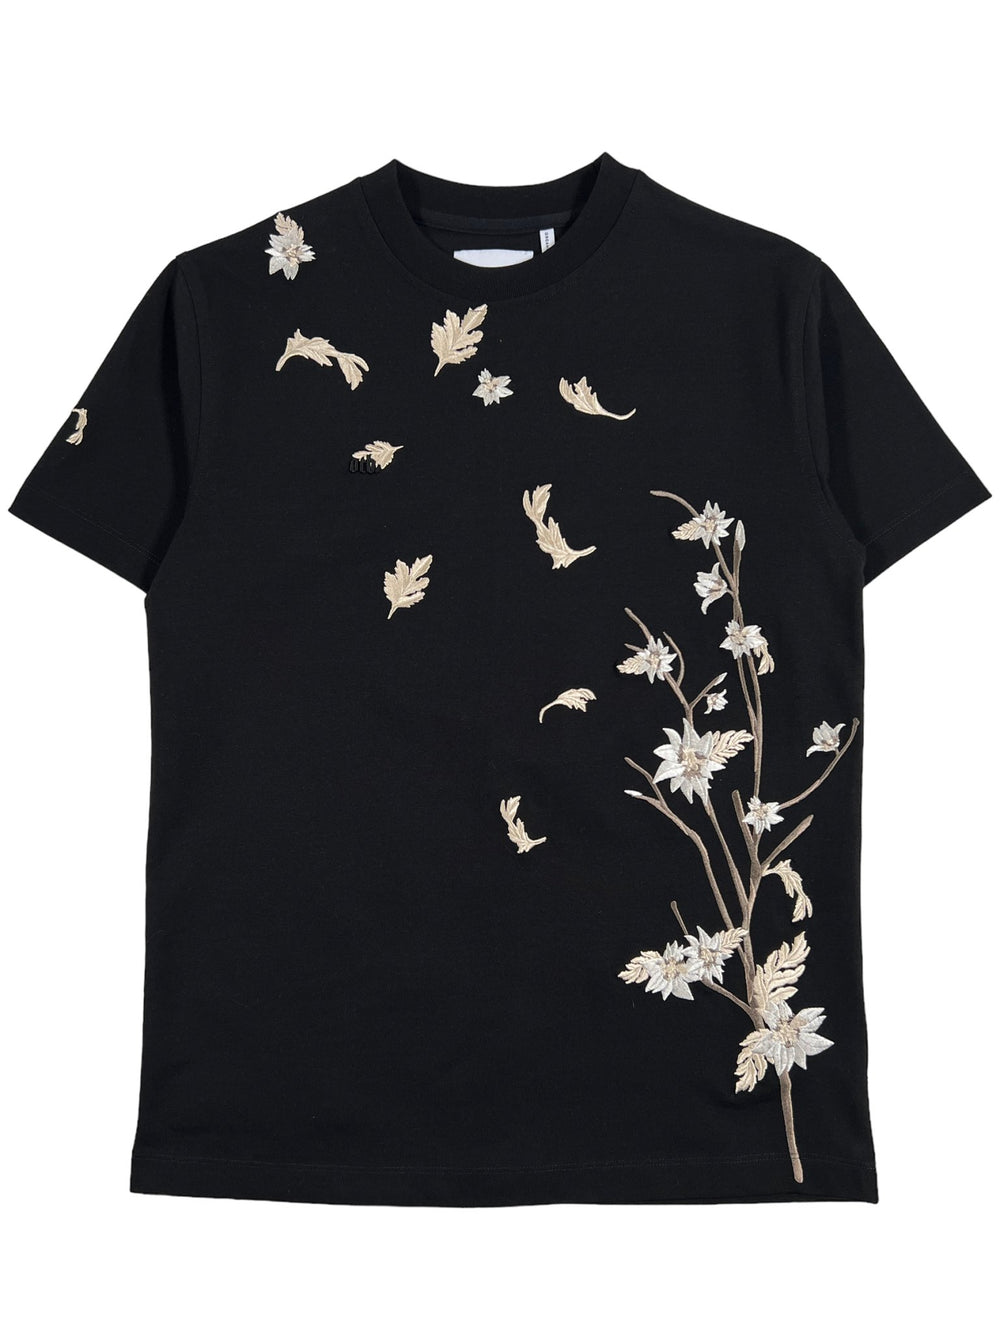 Probus ONLY THE BLIND OTB-T1337 WIND BLOSSOM T-SHIRT BLK ONLY THE BLIND OTB-T1337 WIND BLOSSOM T-SHIRT BLK BLACK